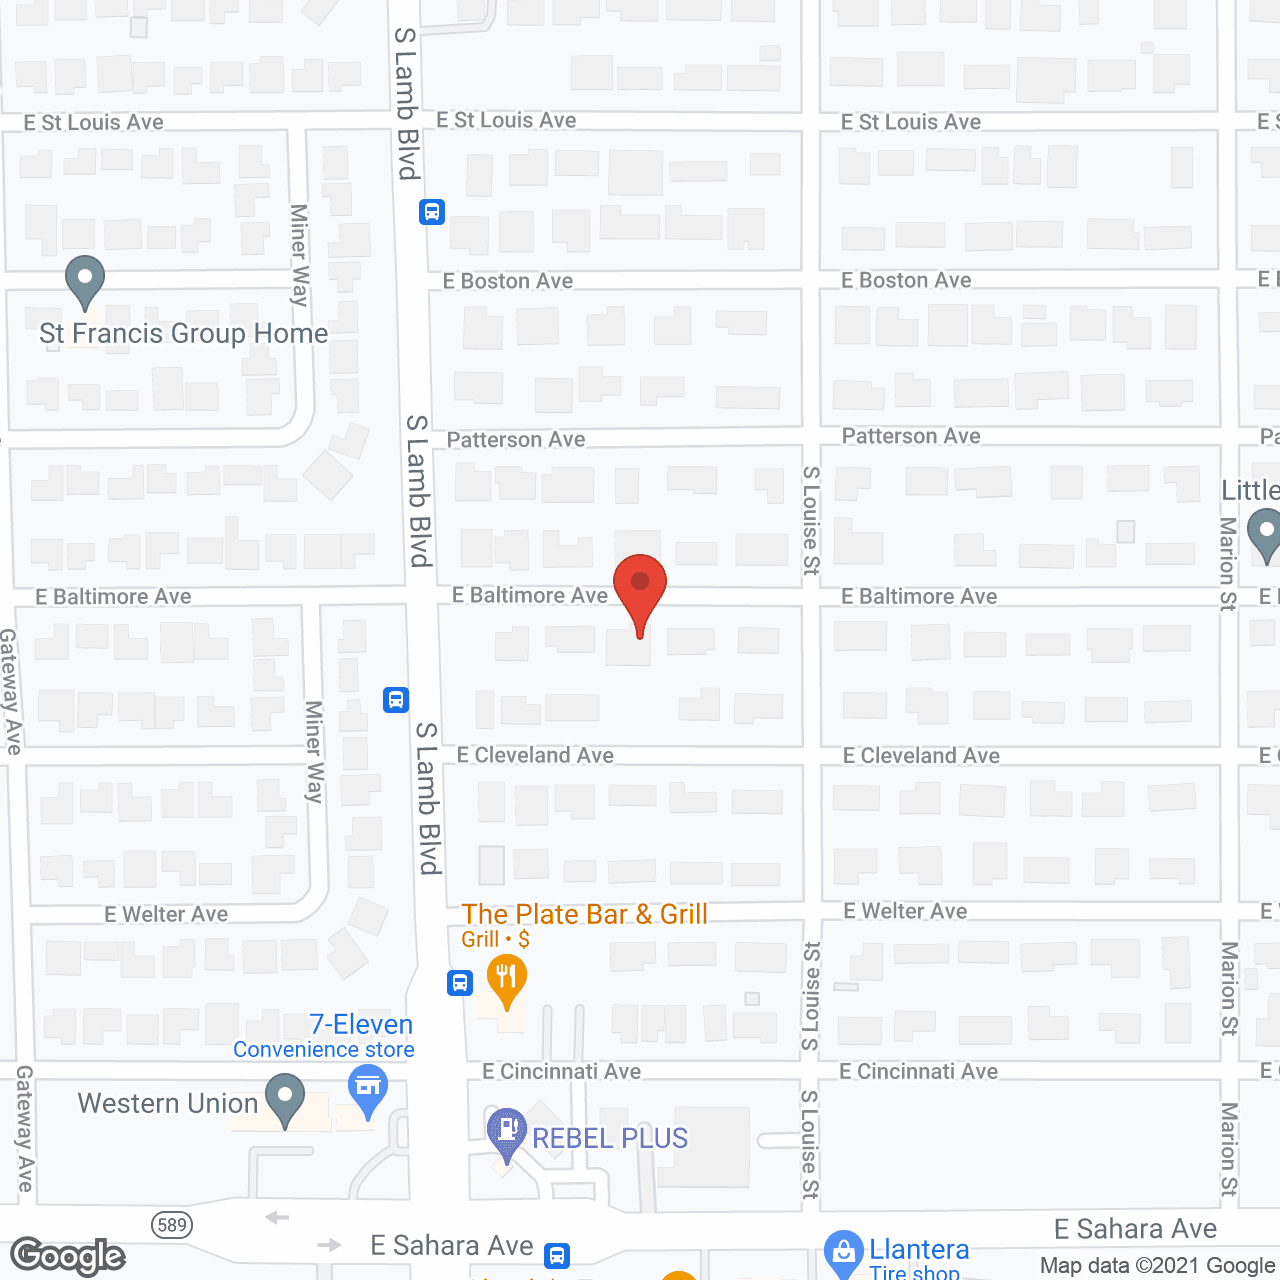 Saint Francis Group Home Care V in google map